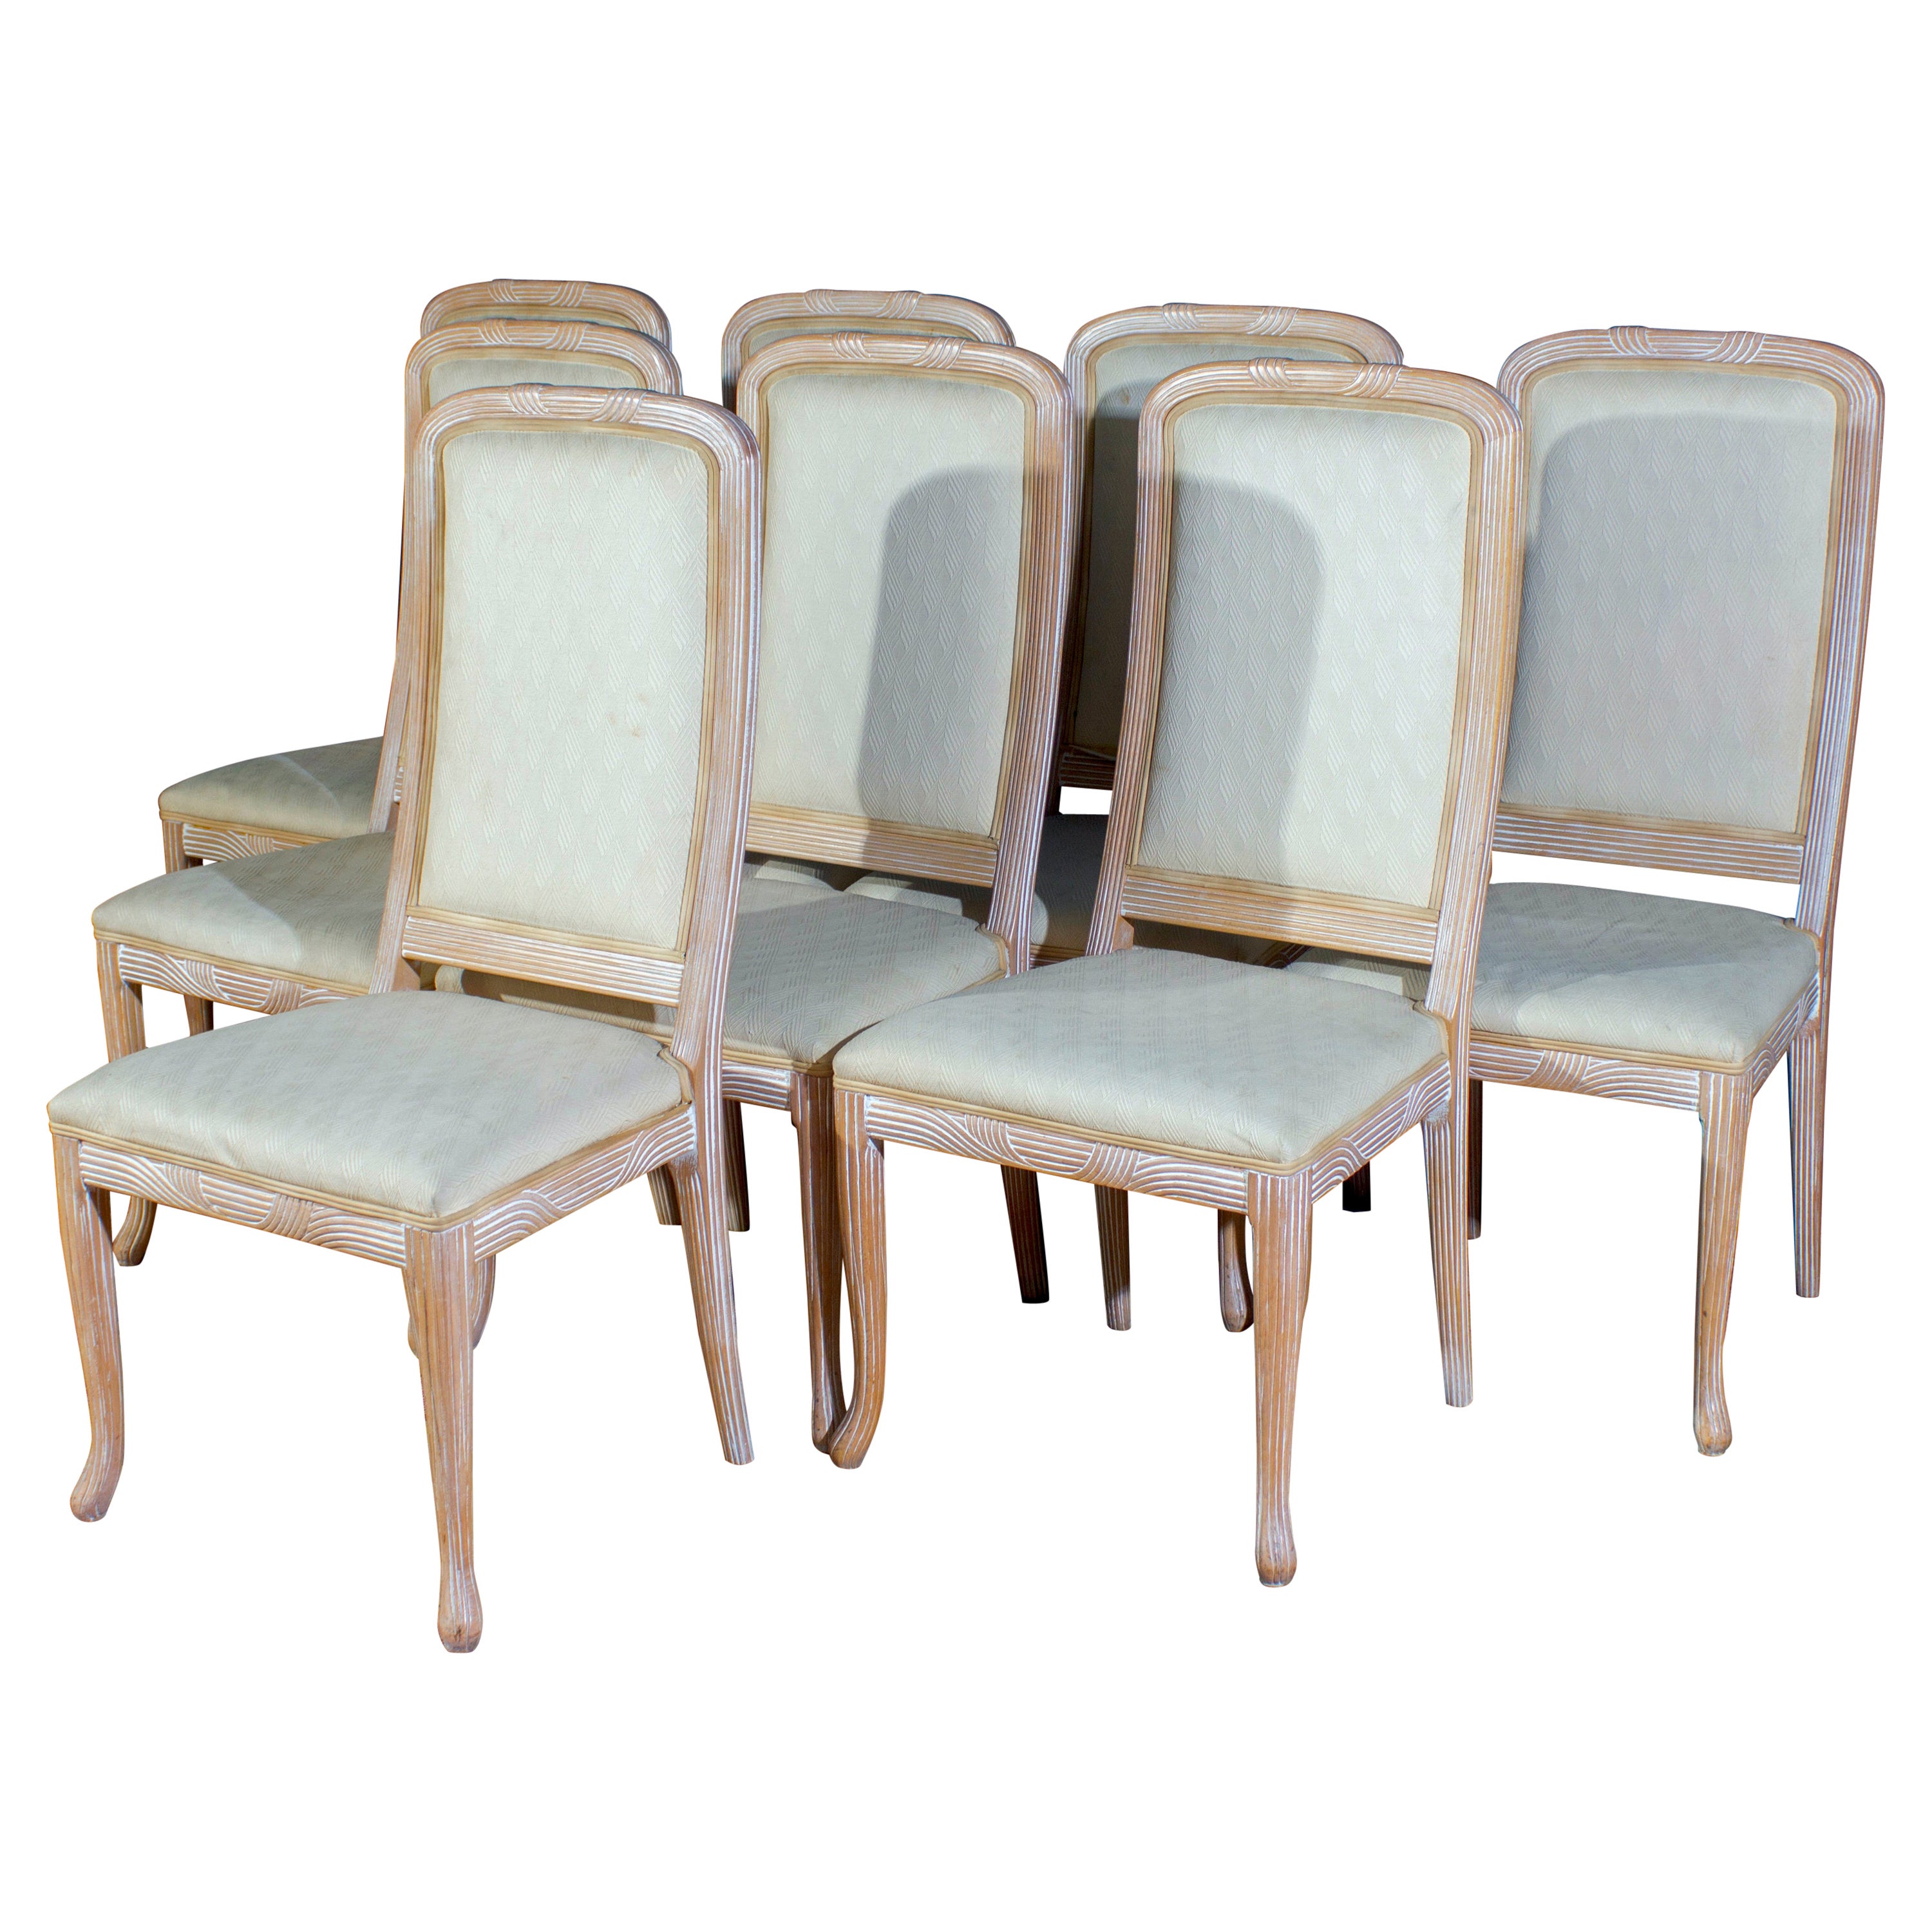 Set of Four Antique Italian Dining Chairs – M.Naeve